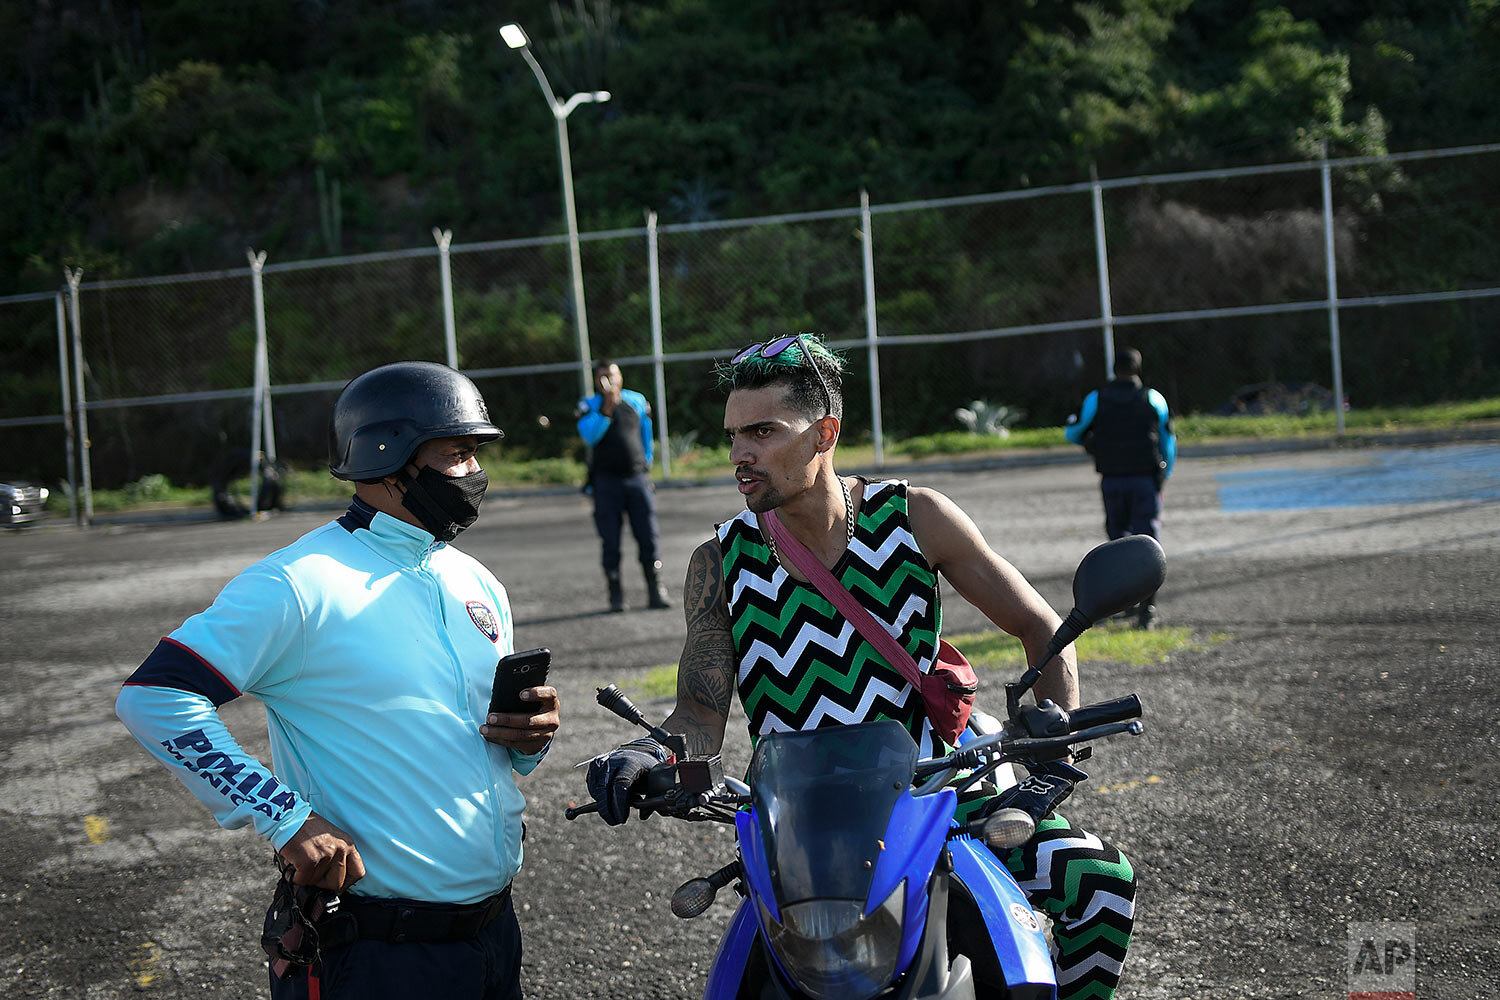  Motorcycle stuntman Pedro Aldana speaks with a police officer after officers stopped his previously authorized exhibition, citing COVID-19 restrictions, on Camuri Chico beach in La Guaira, Venezuela, Saturday, Jan. 30, 2021. (AP Photo/Matias Delacro